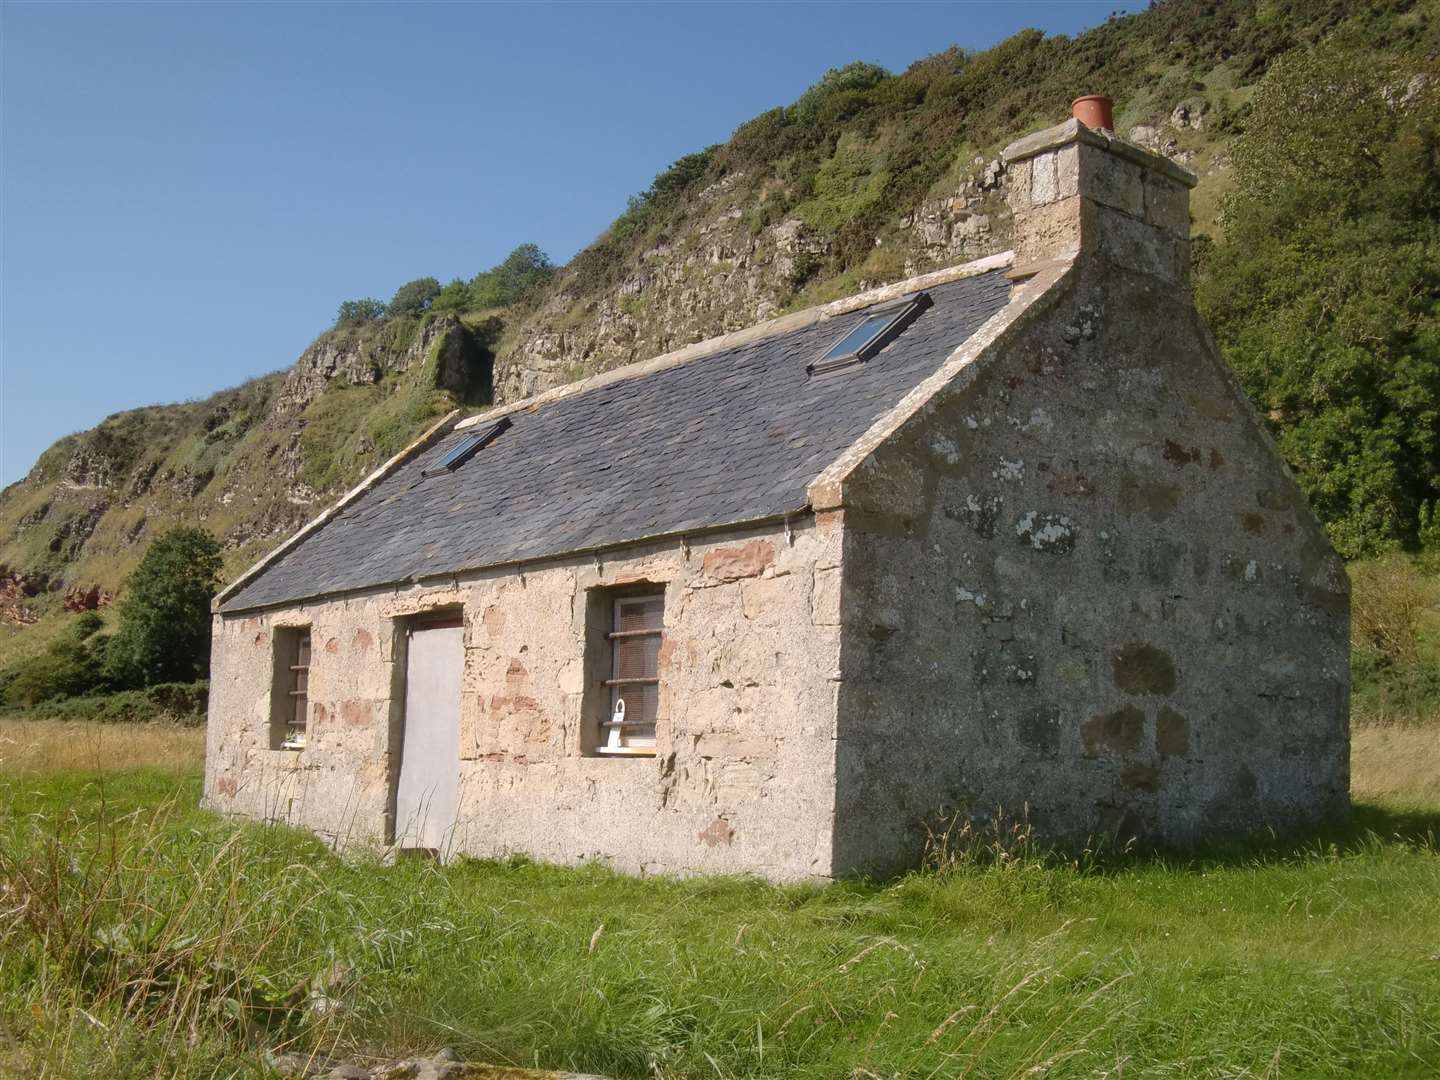 The renovated fishing bothy reached after a gap in a drystone wall.